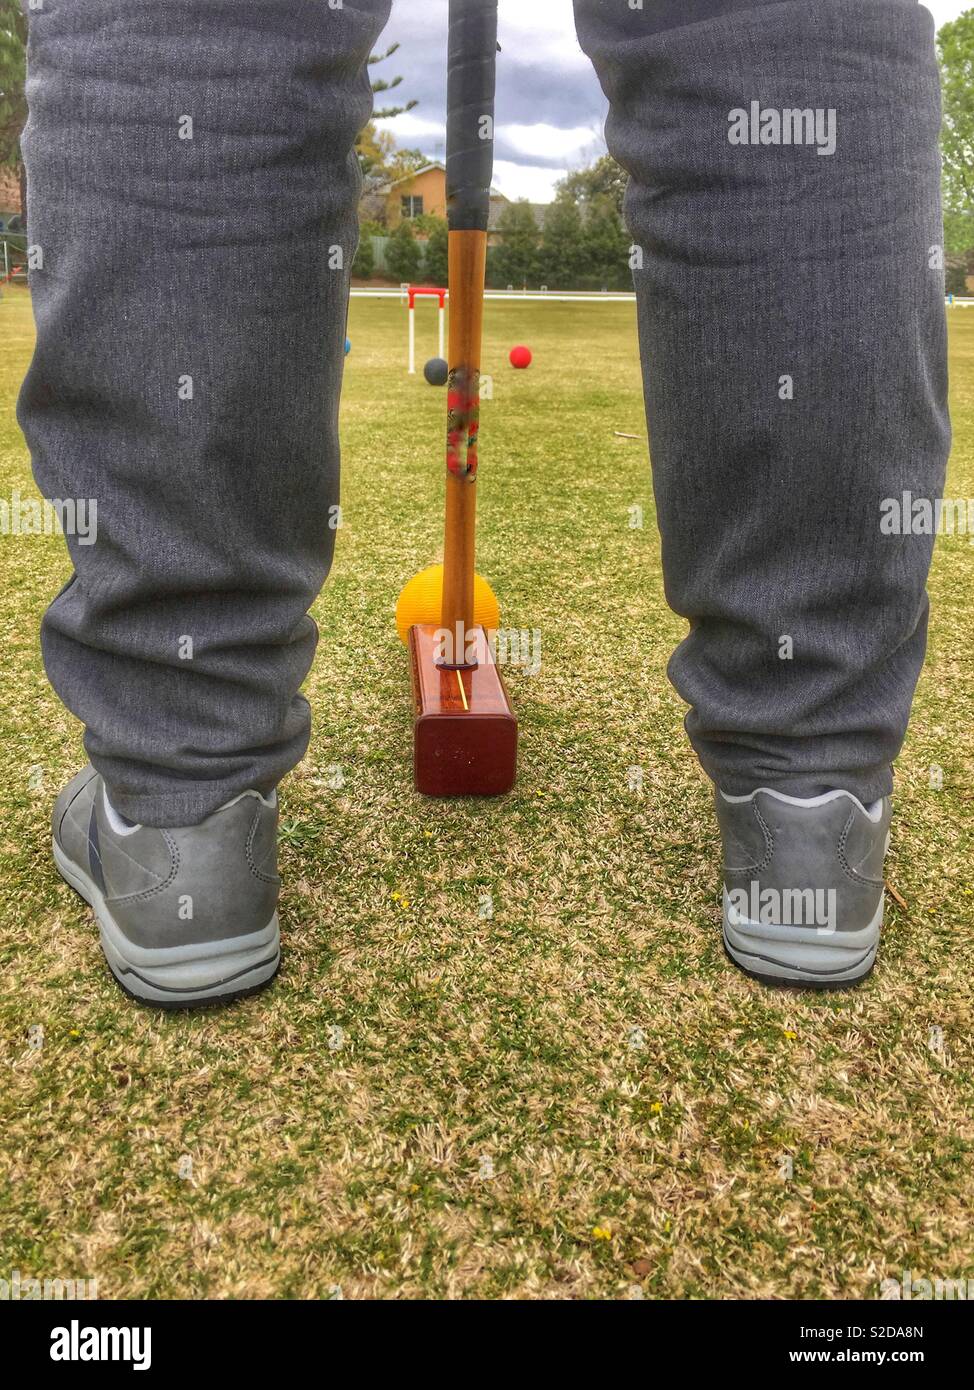 Between the legs rear view of croquet game as player hits ball with mallet. Croquet is  a  strategy / sport played outdoors involving hitting balls with a mallet through hoops on lawn. Stock Photo